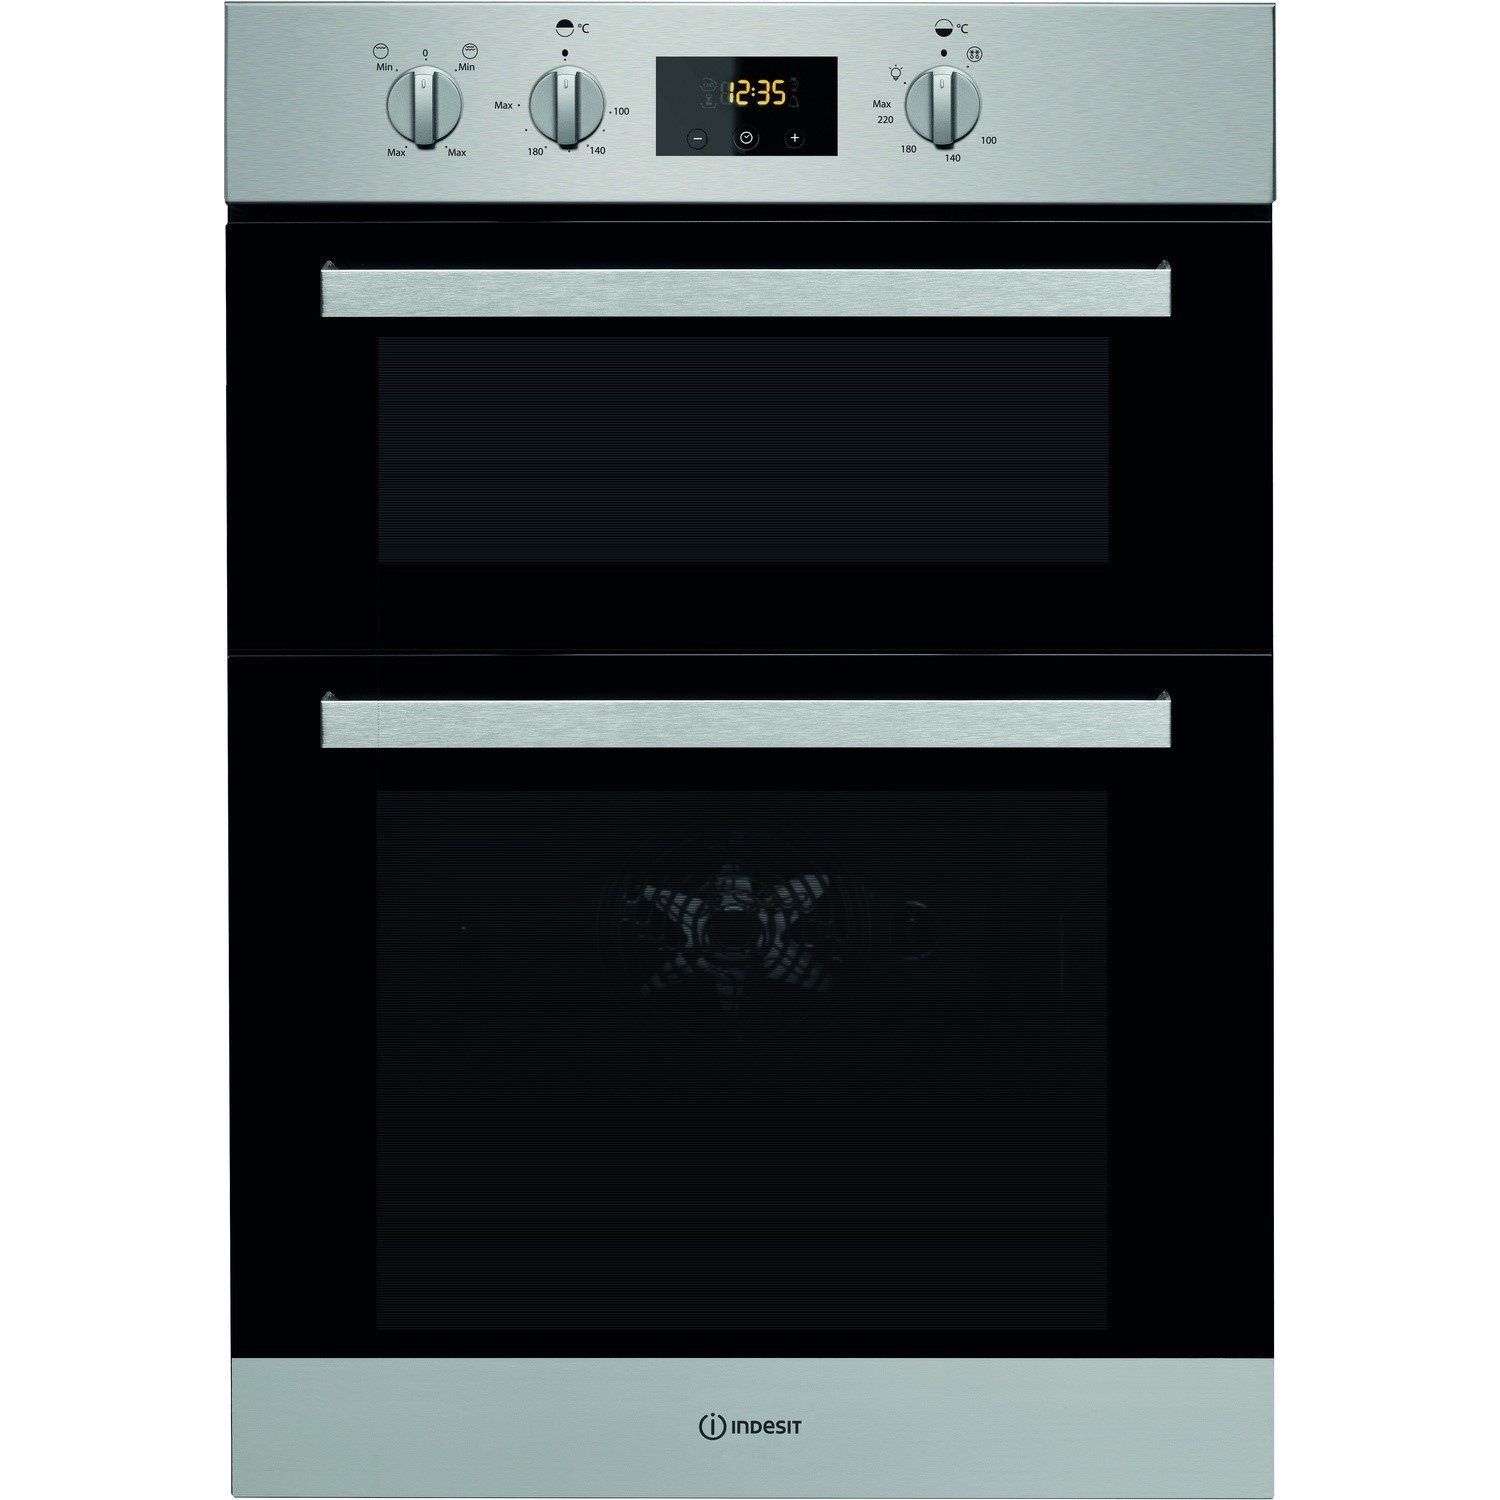 Refurbished Indesit IDD6340IX 60cm Double Built In Electric Oven